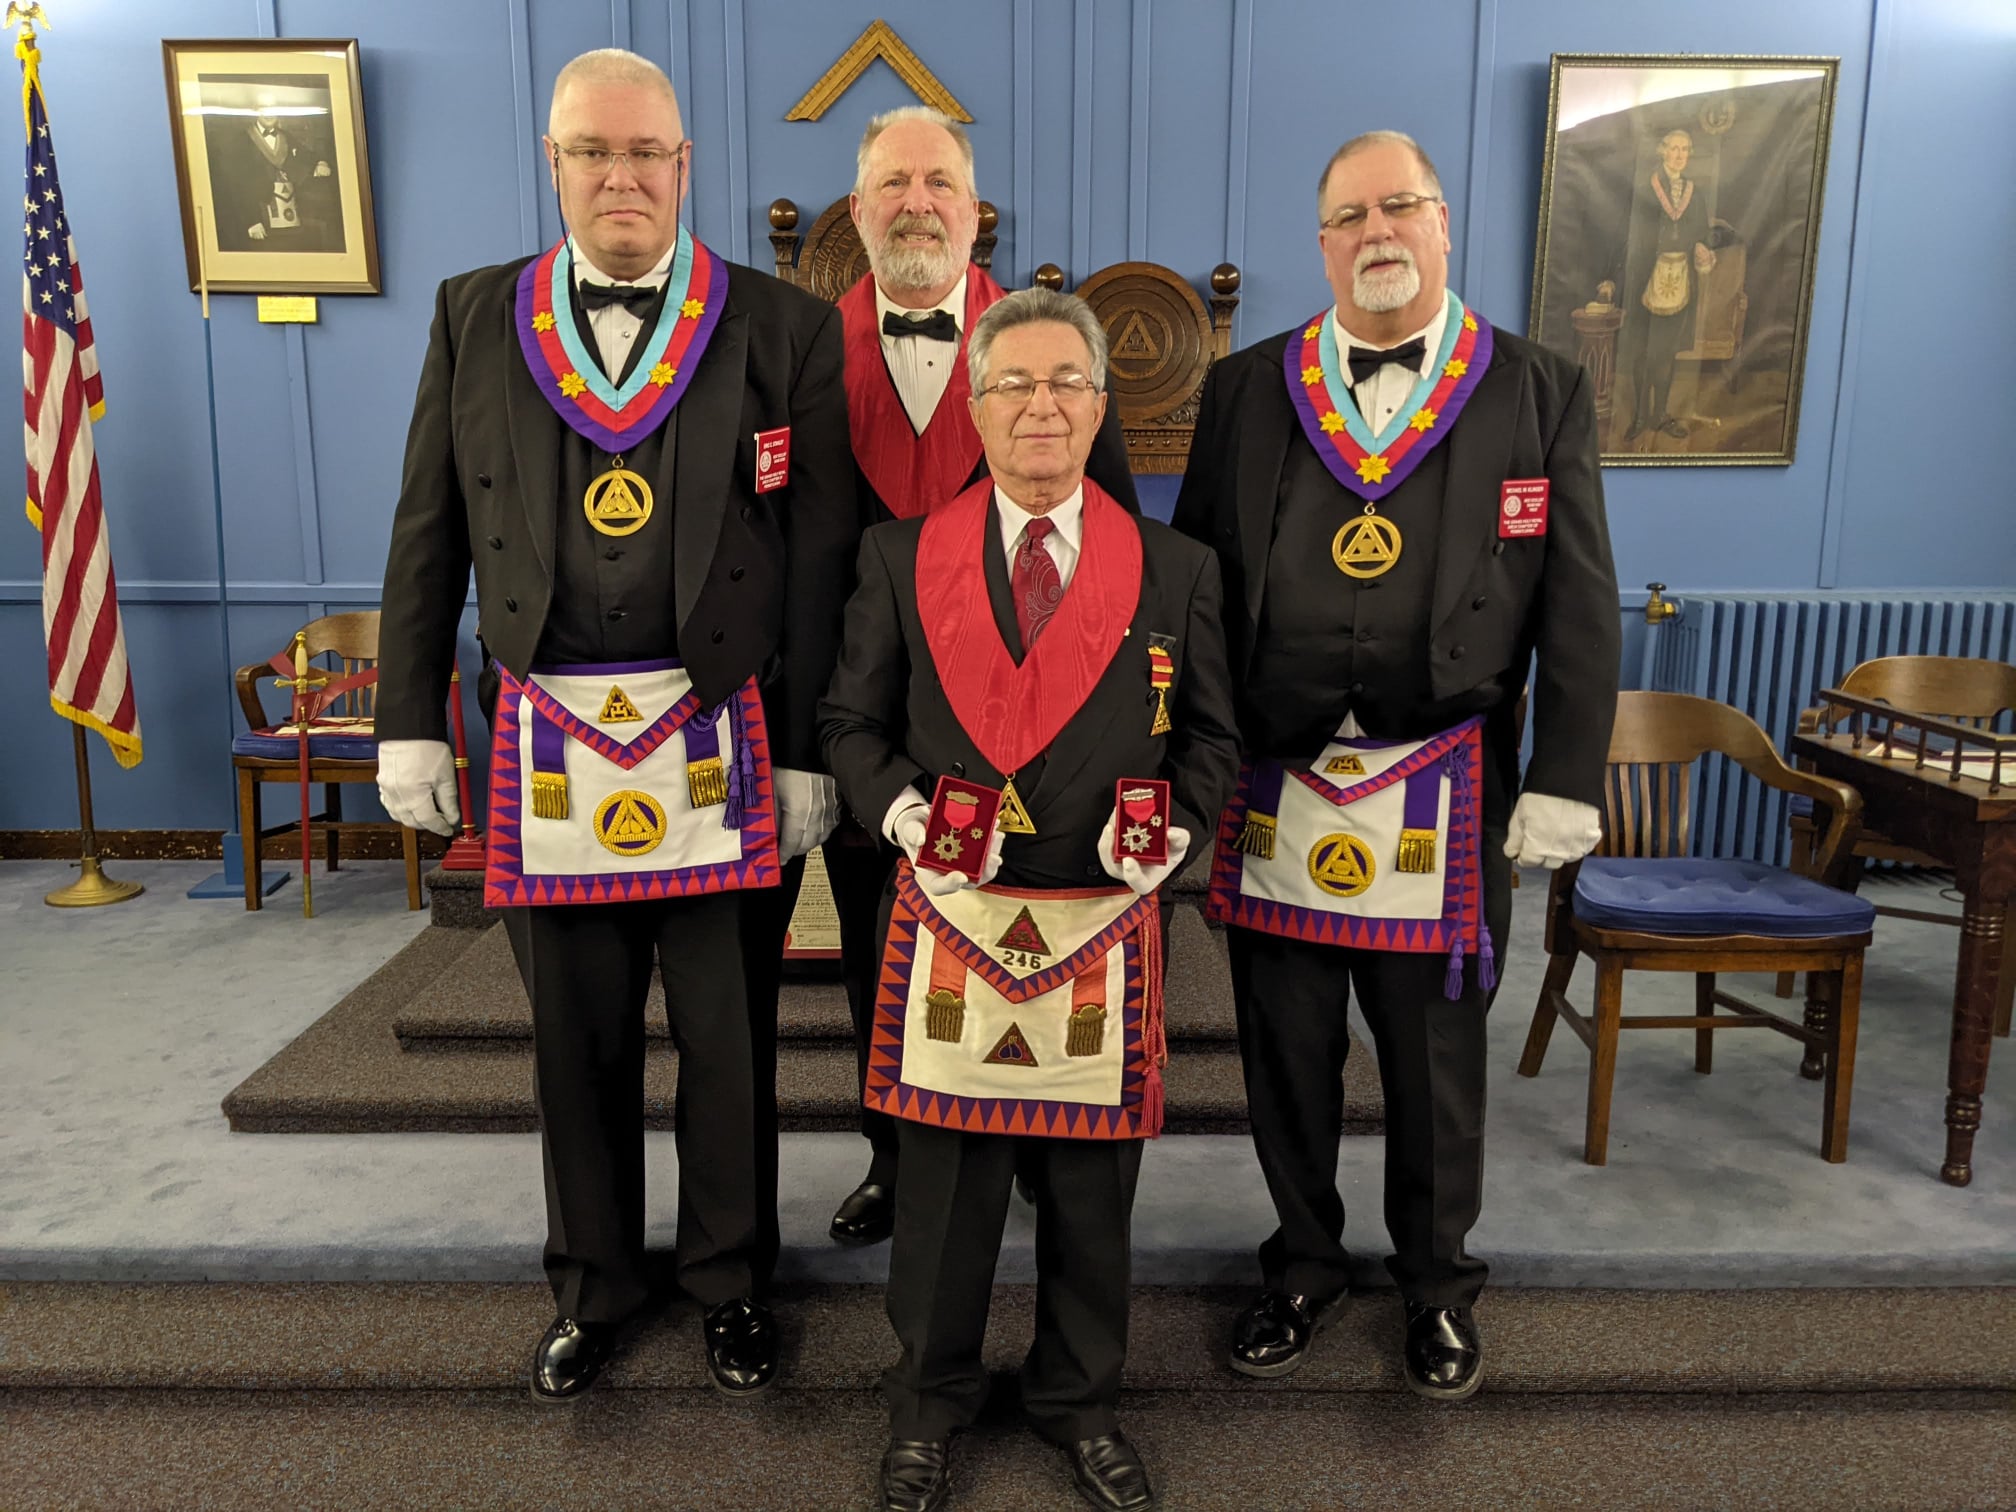 Companion George Avlonitis, PHP, was presented with his Bronze and Silver Triple Triangle Awards. 